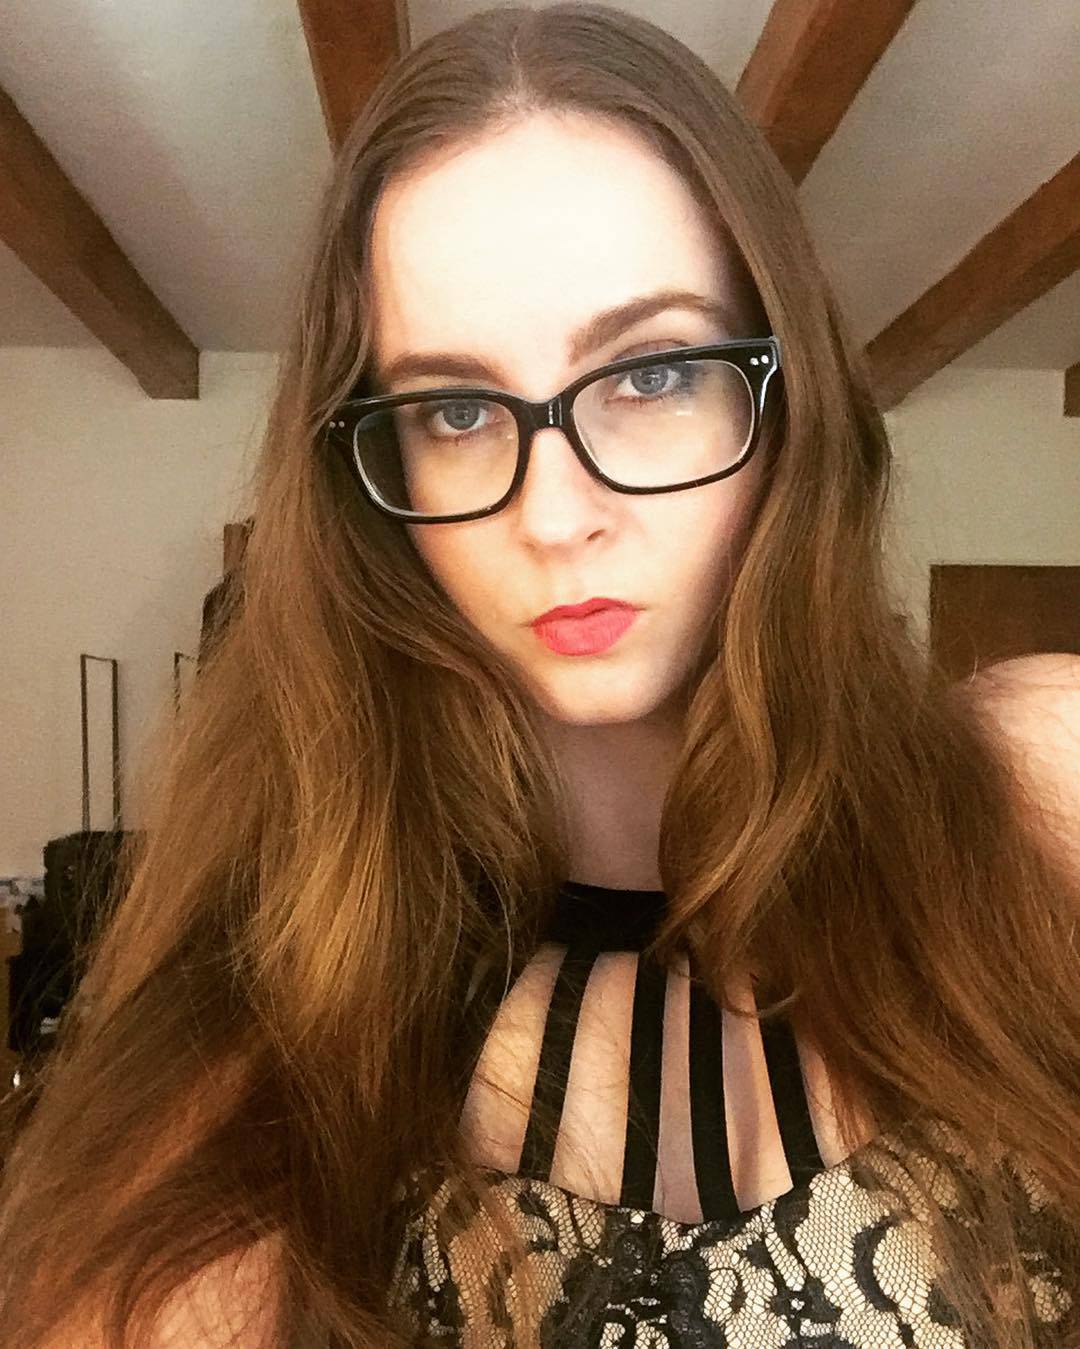 I Want To Force You And Train You On Your Kinks To Be The Best Exploring Them Kik Me Mistress 0554